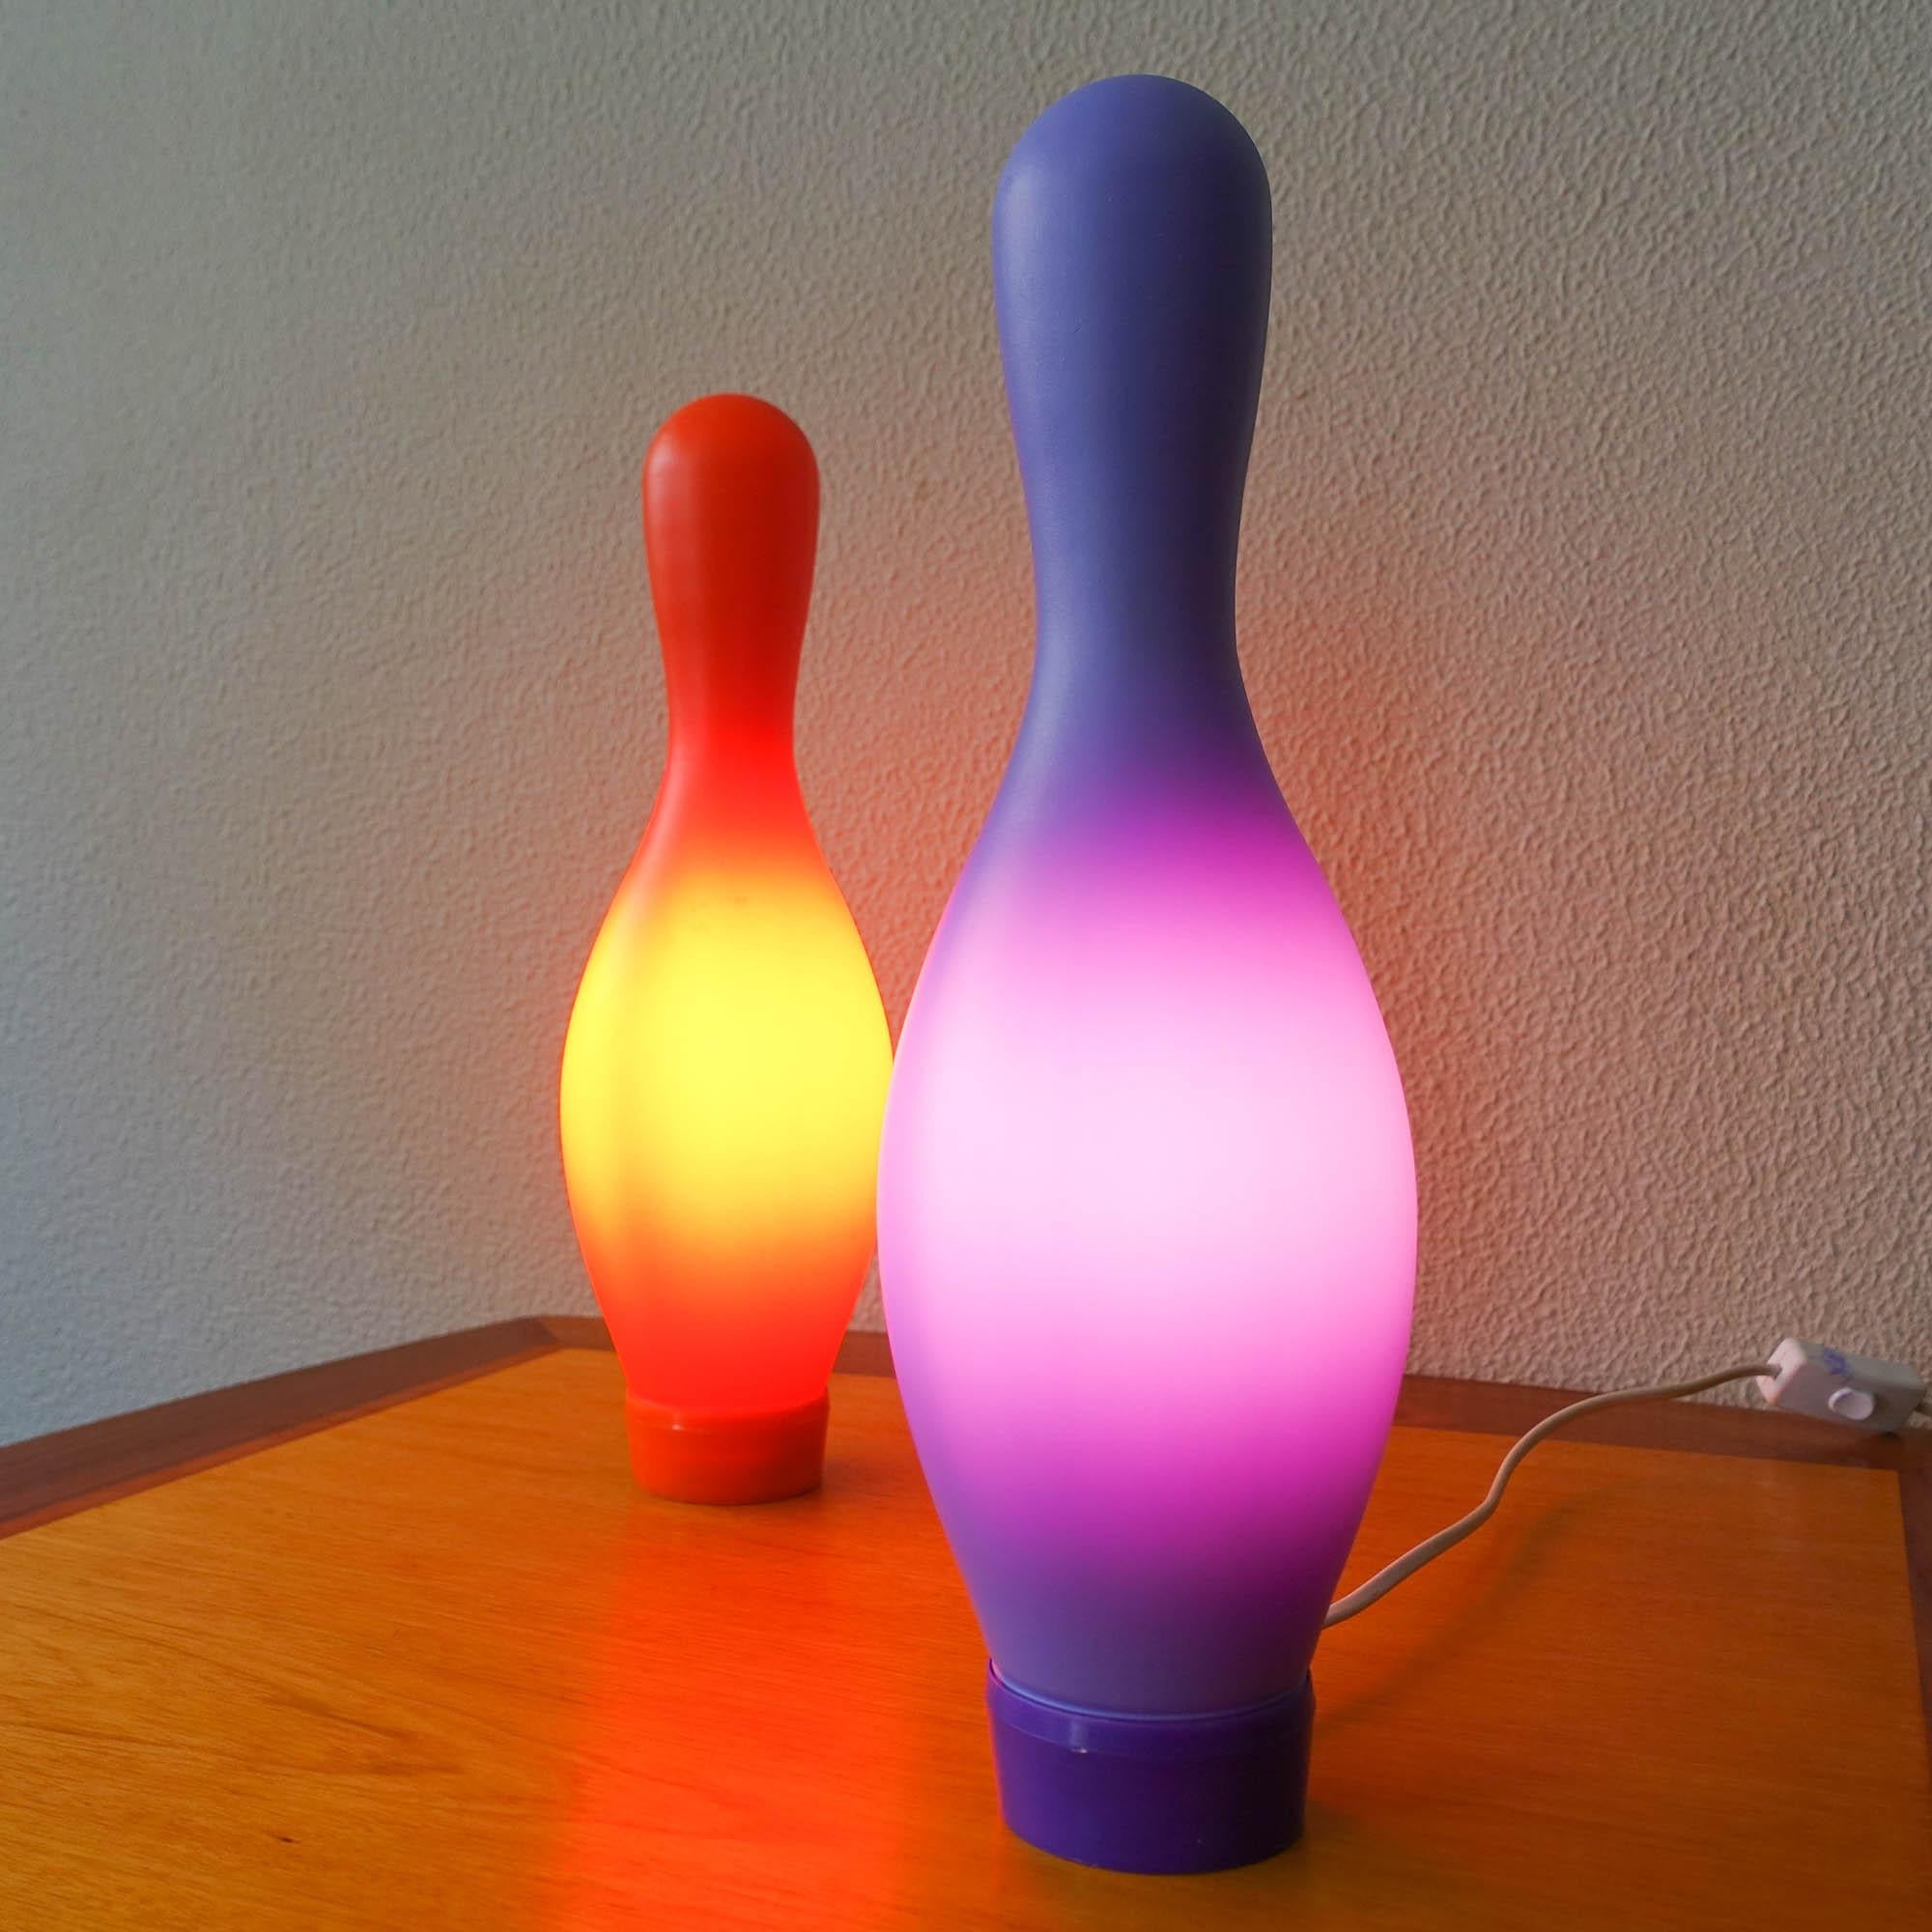 Acrylic Pair of Knock-Off Table Lamp by Josh Owen for Bozart, 2002 For Sale